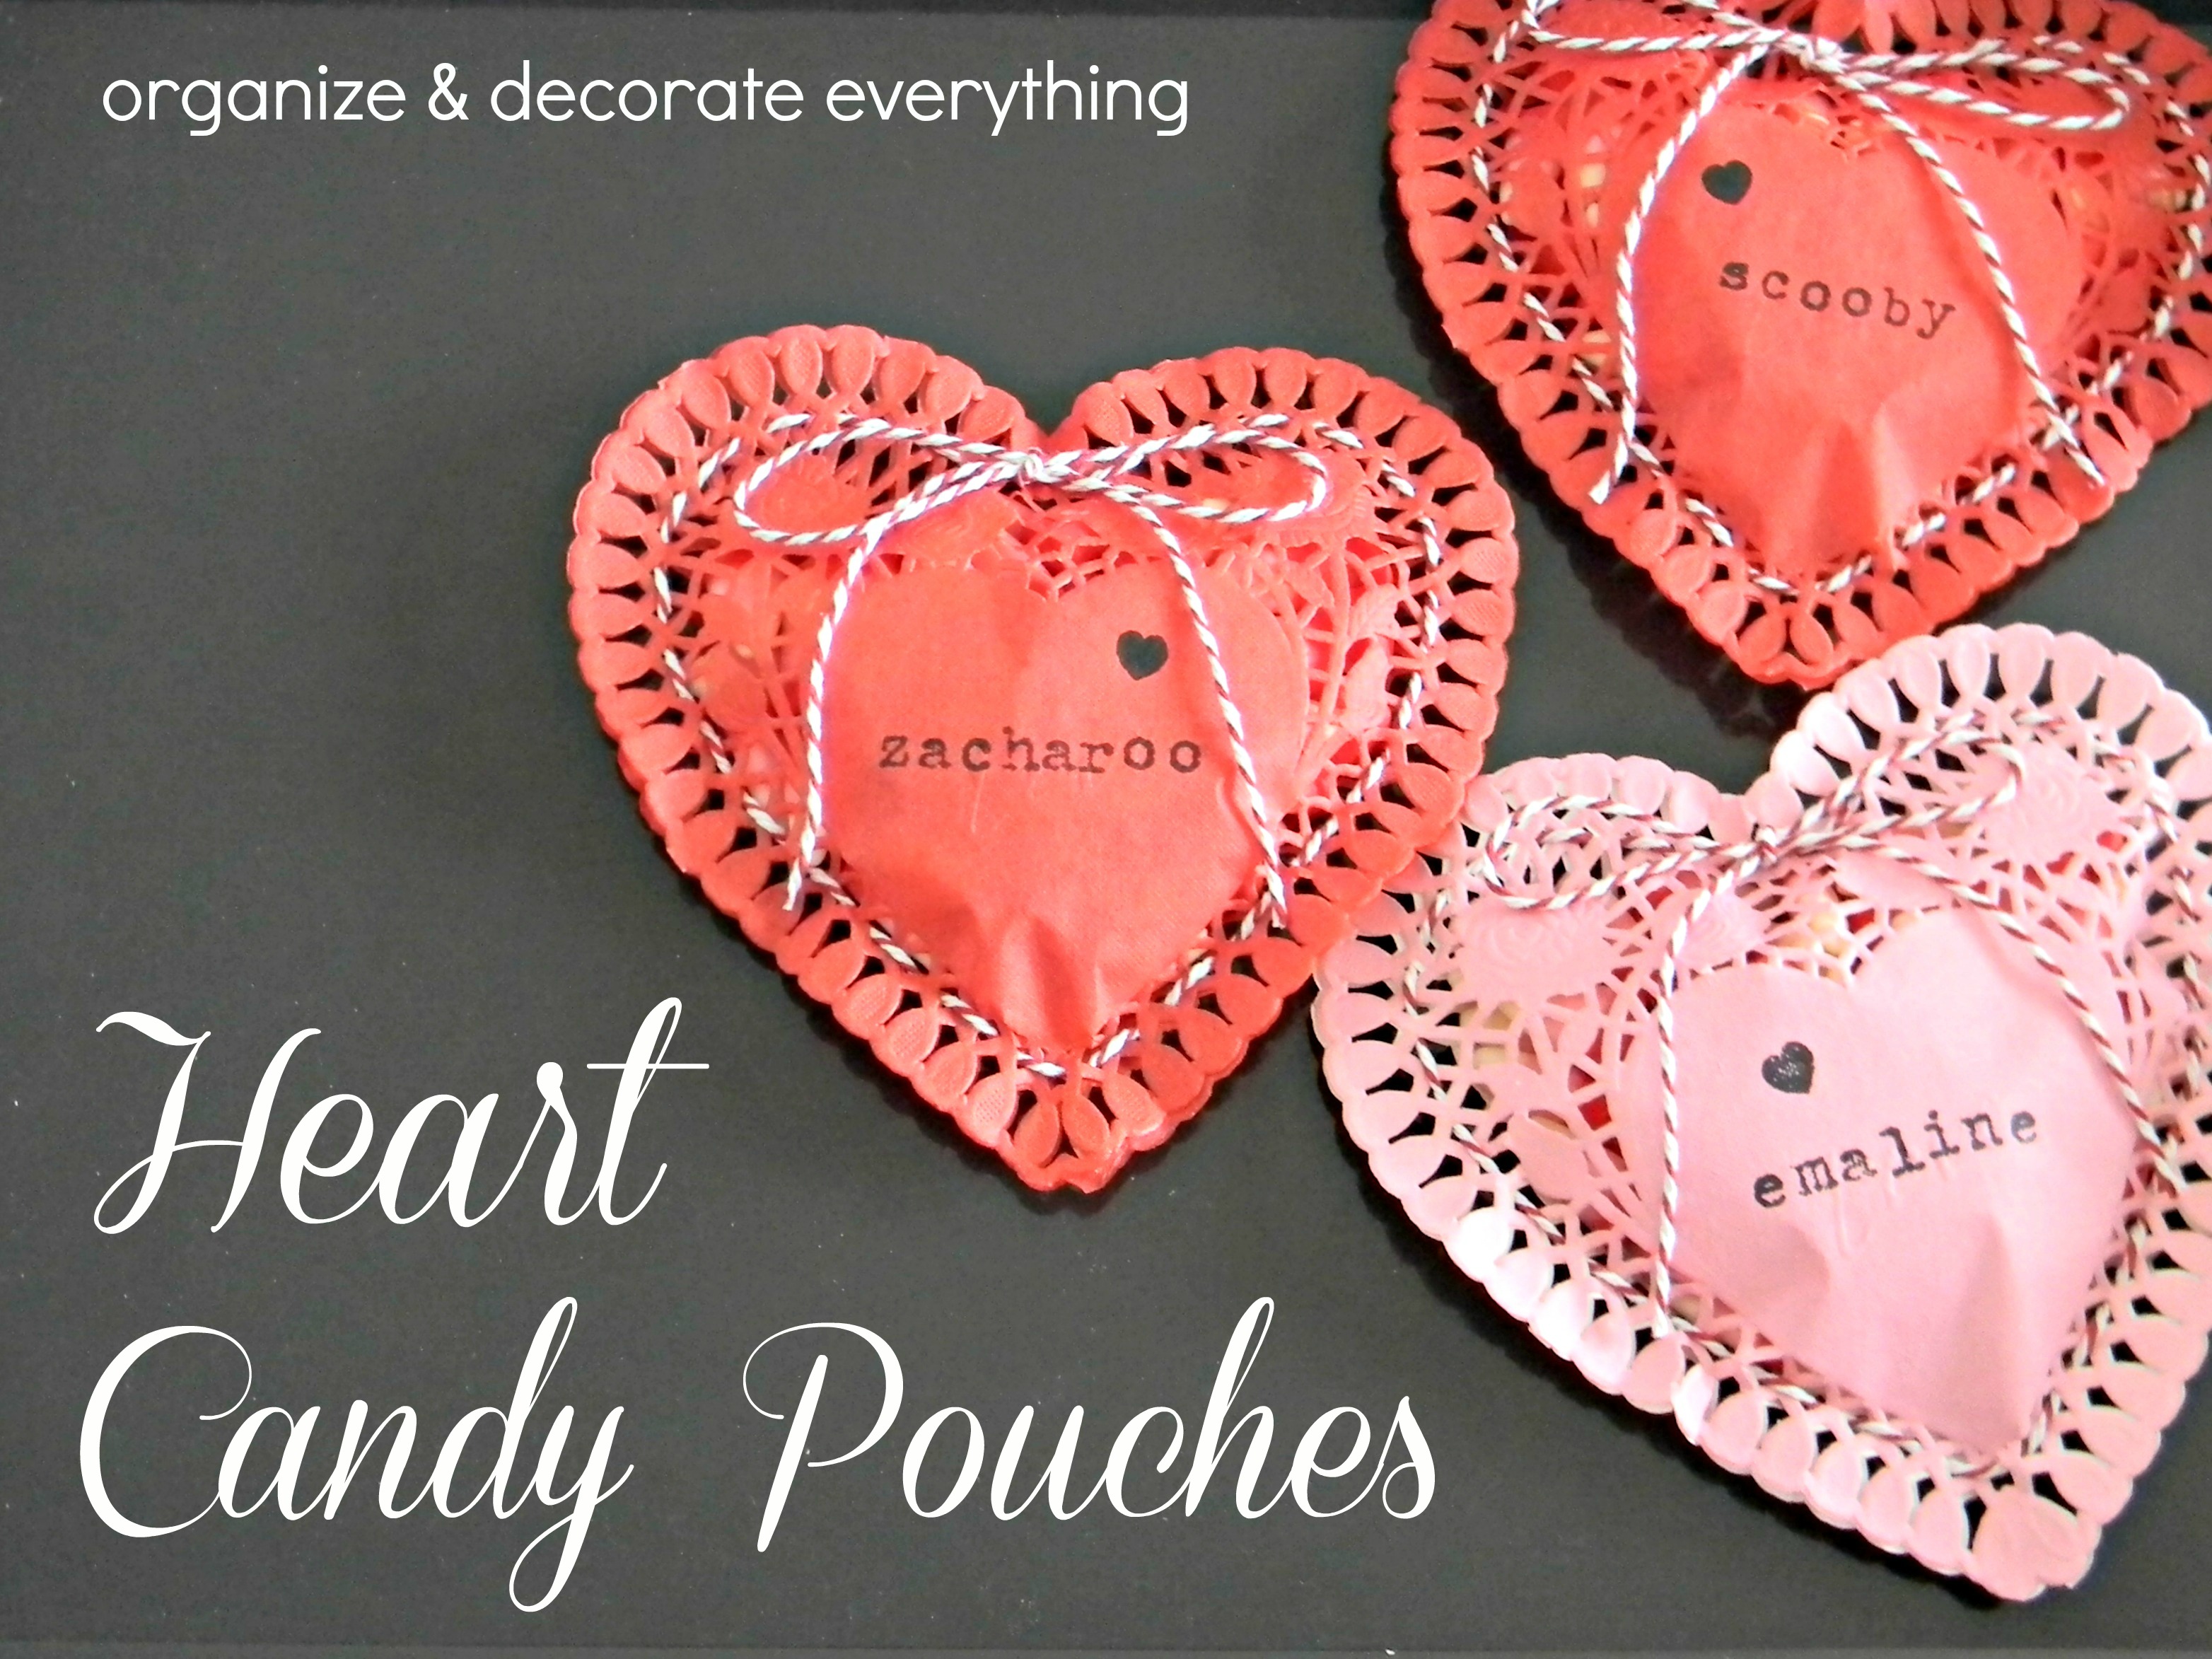 Heart Candy Pouches by Organiize & Decorate Everything 